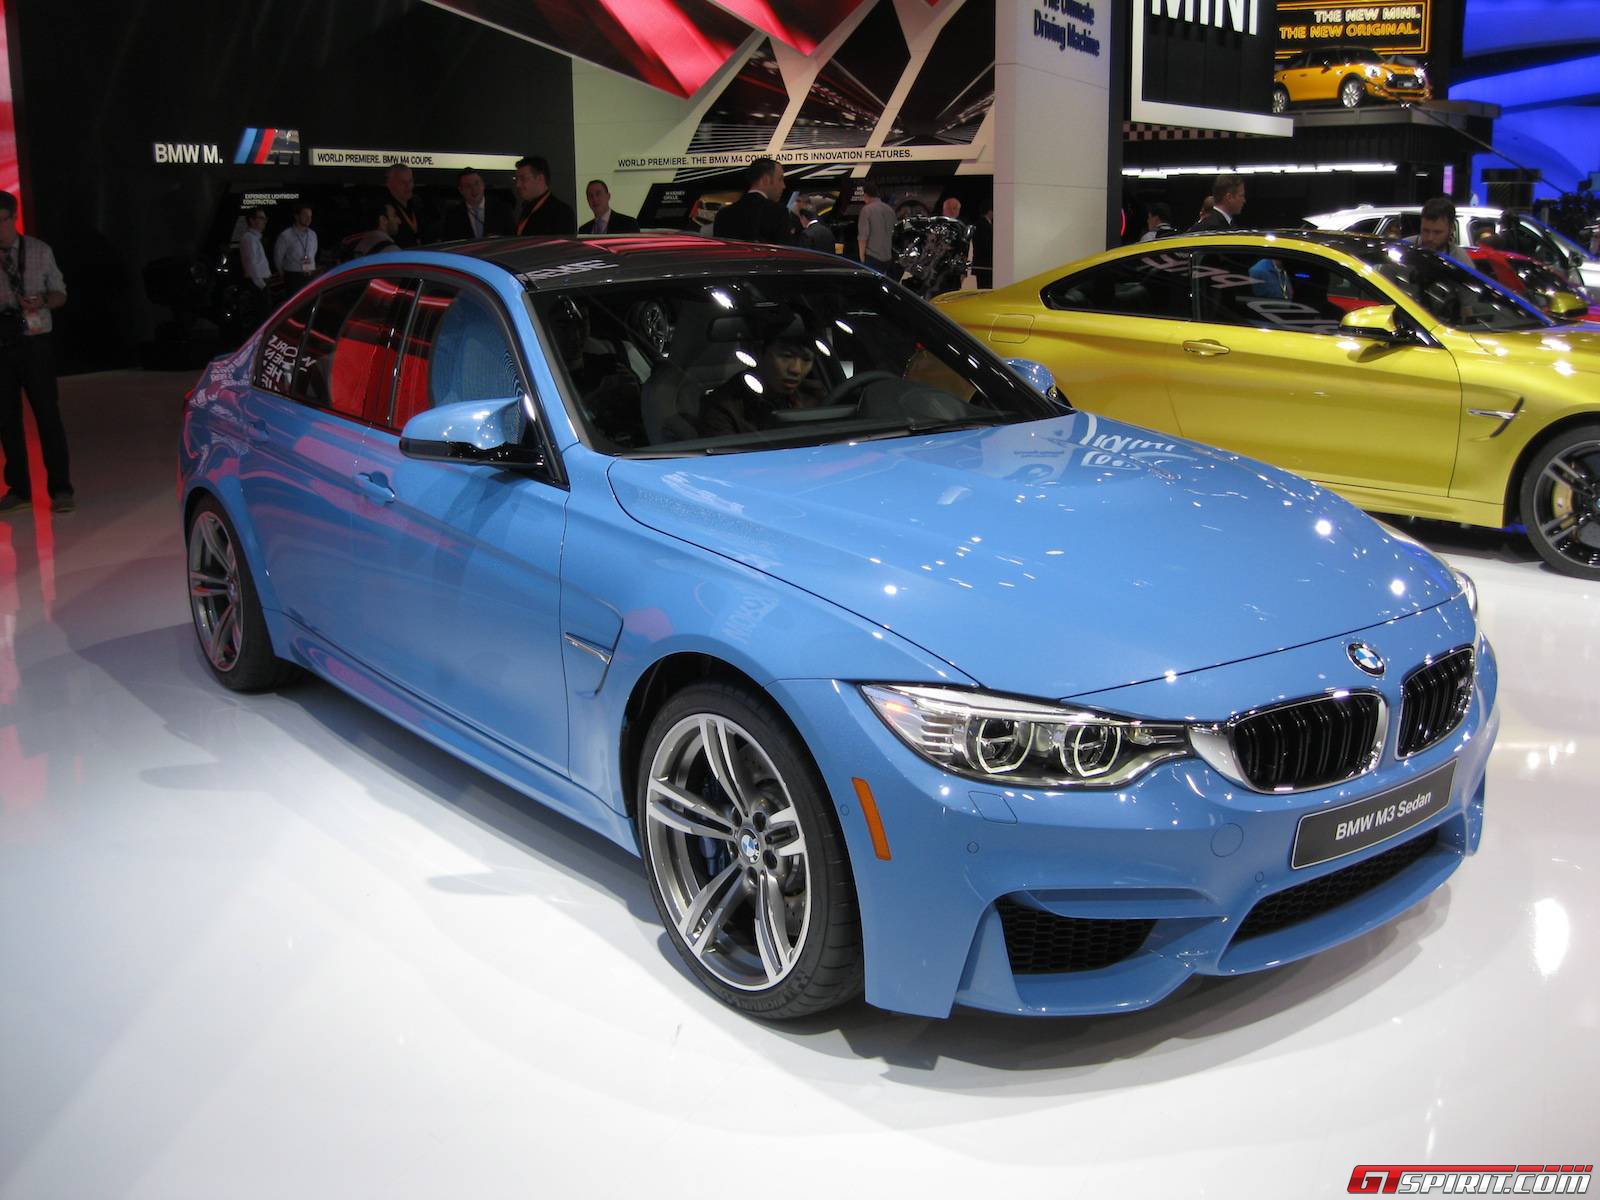 2014 Bmw m3 release date #1